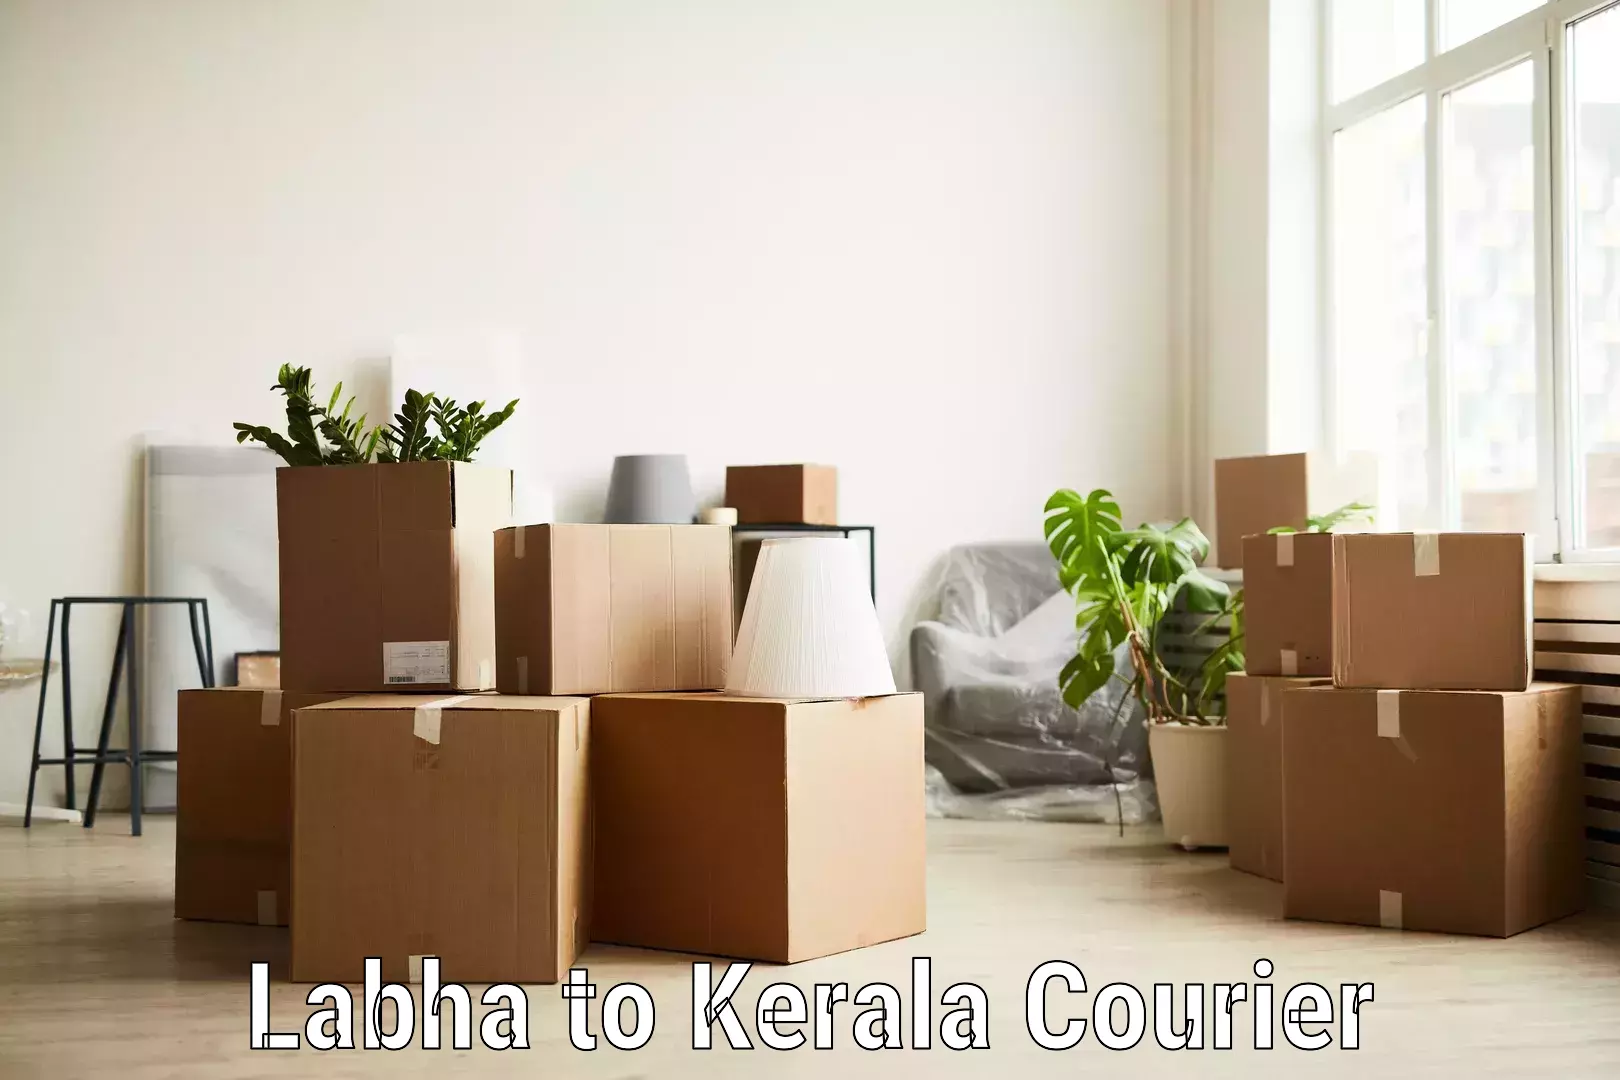 High-capacity parcel service Labha to Cochin University of Science and Technology